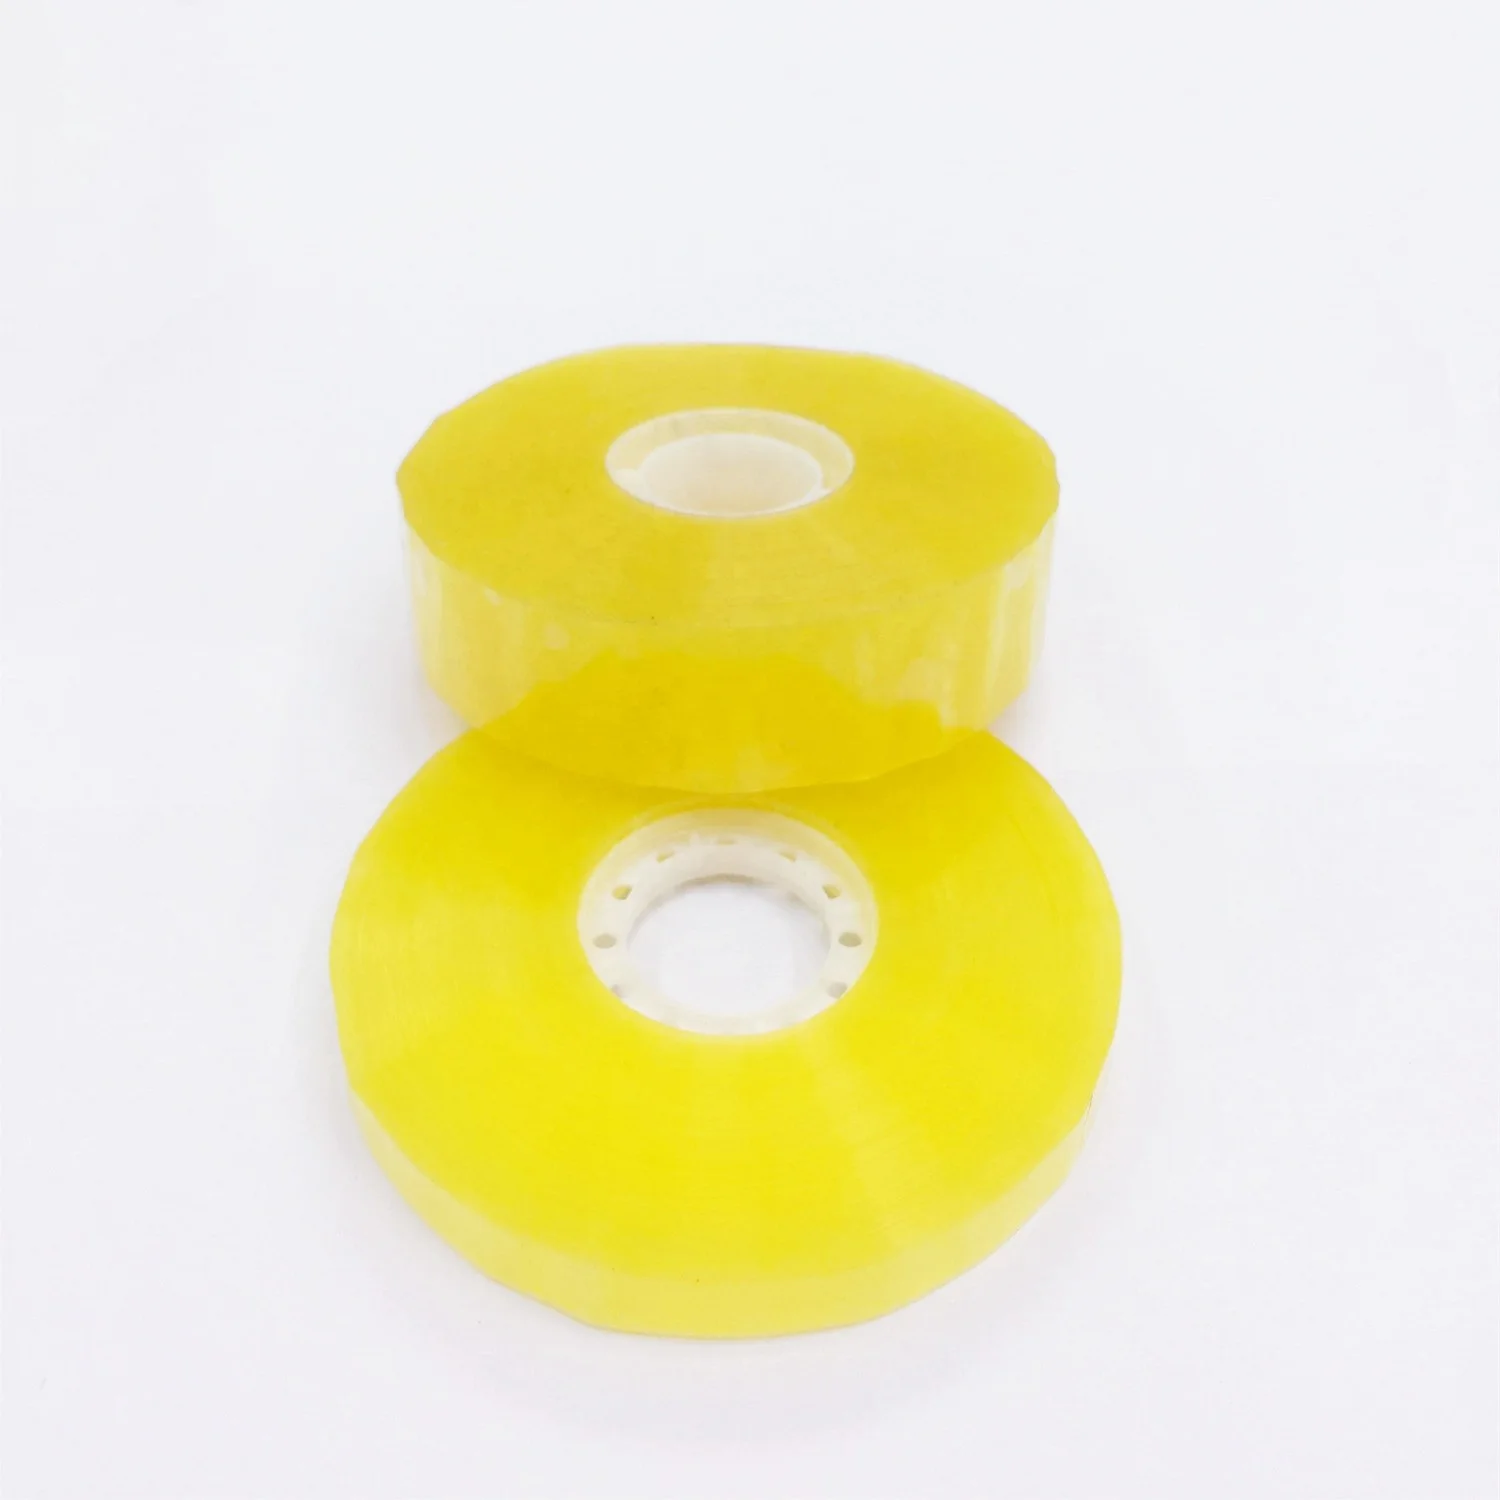 2 4cm Yellowish Stationery Tape Super Big 24mm Factory Used Box Packing Bopp Adhesive Tape Buy 24mm Yellowish Stationery Tape Super Big Factory Used Adhesive Tape Inner Package Bopp Adhesive Tape Product On Alibaba Com